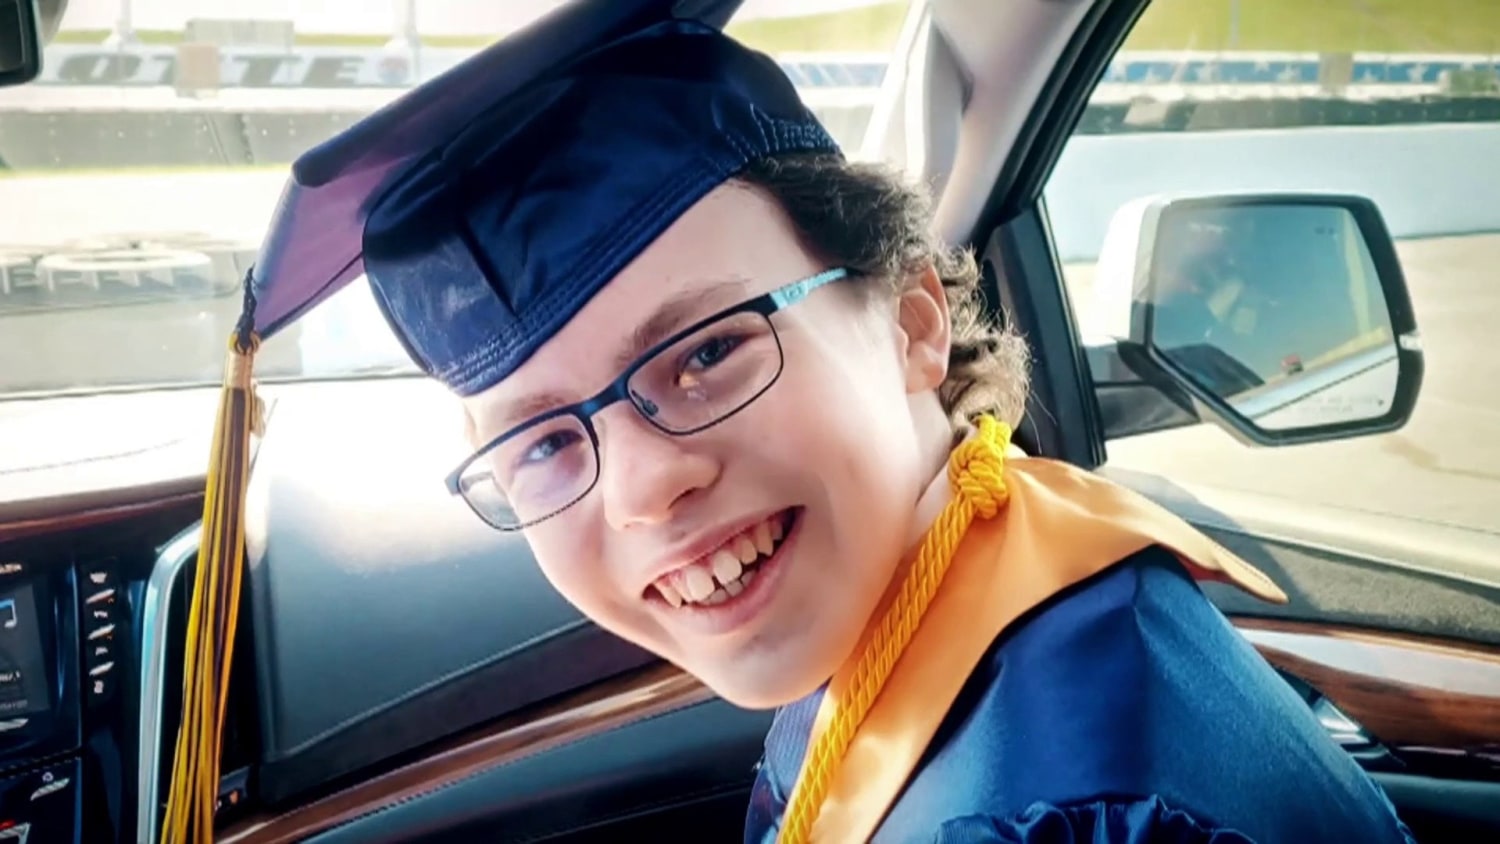 Why 12-year-old college grad's parents are sending her to high school